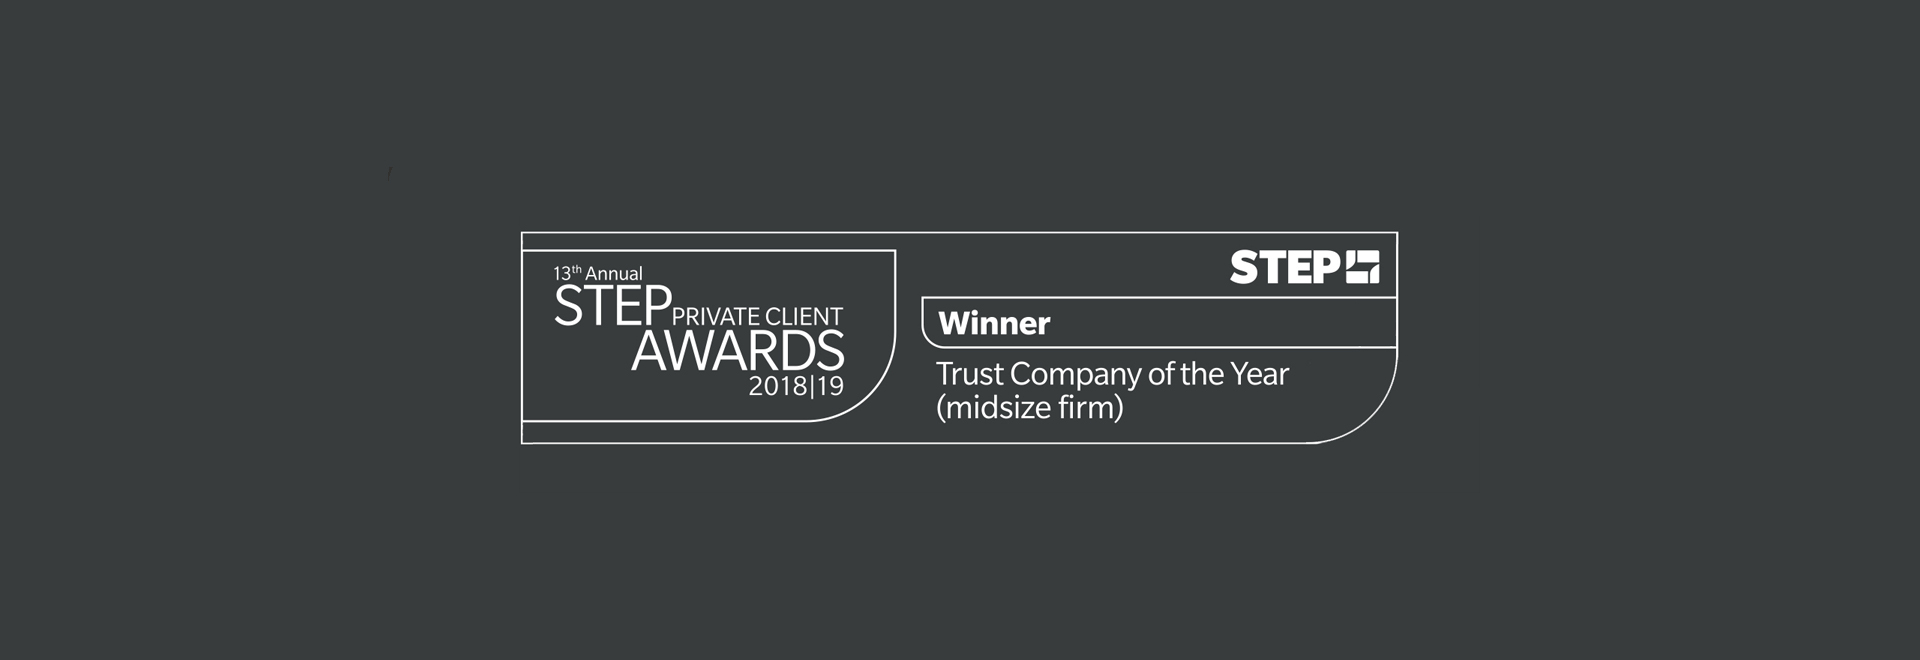 Accuro Wins prestigious Step private client award for the second year running